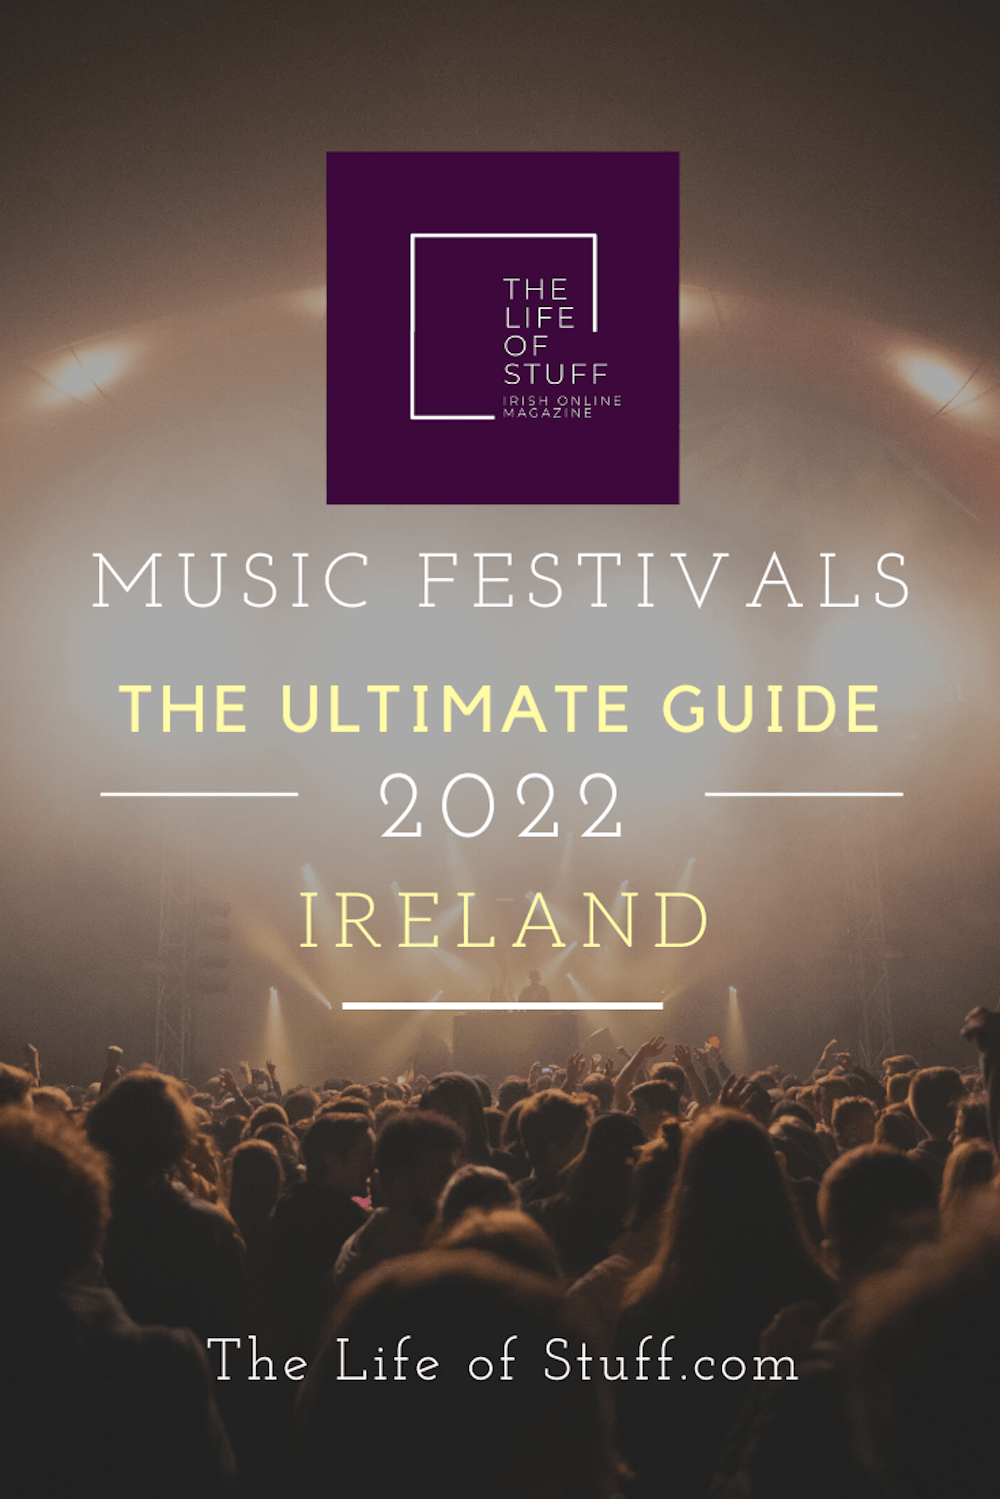 The Ultimate Guide to Music Festivals in Ireland 2022 on The Life of Stuff.com